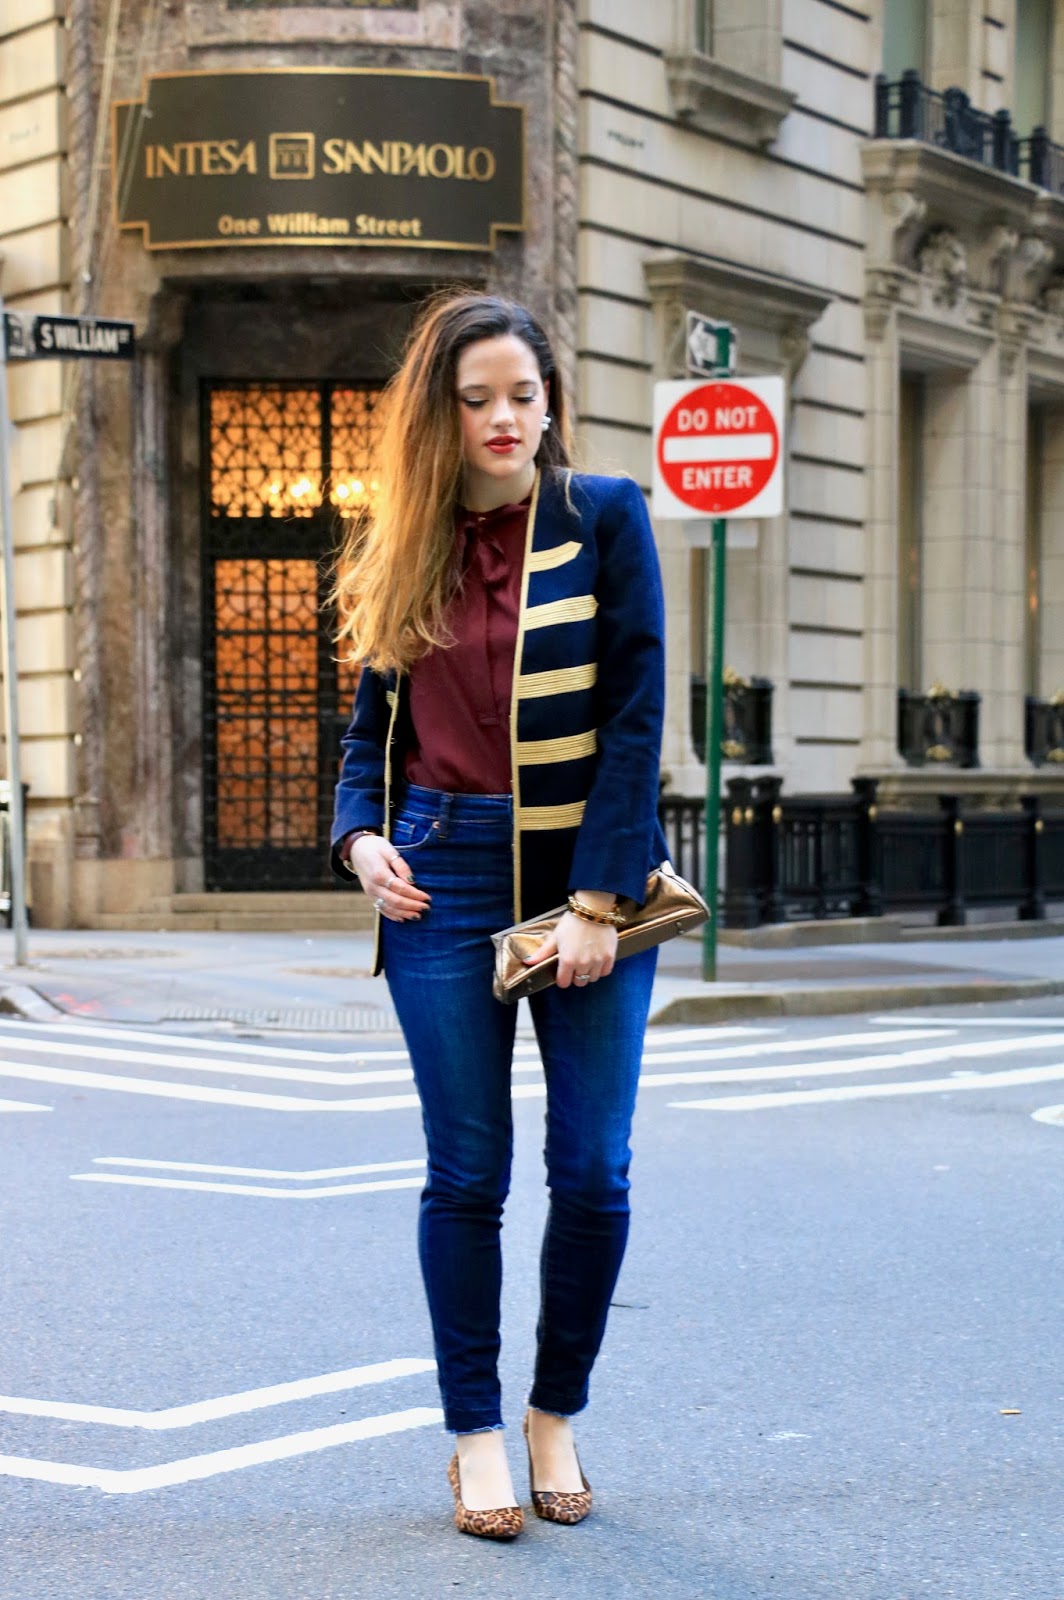 Nyc fashion blogger Kathleen Harper wearing a holiday outfit